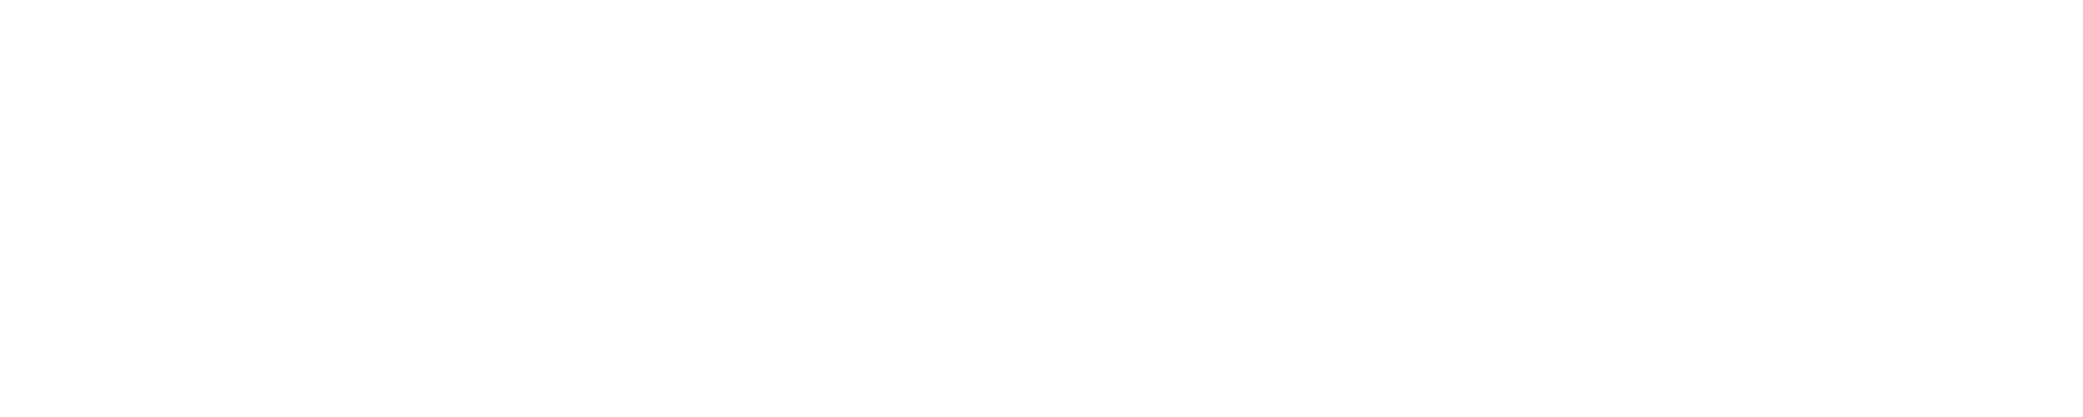 Total Size 1,024,290 SF